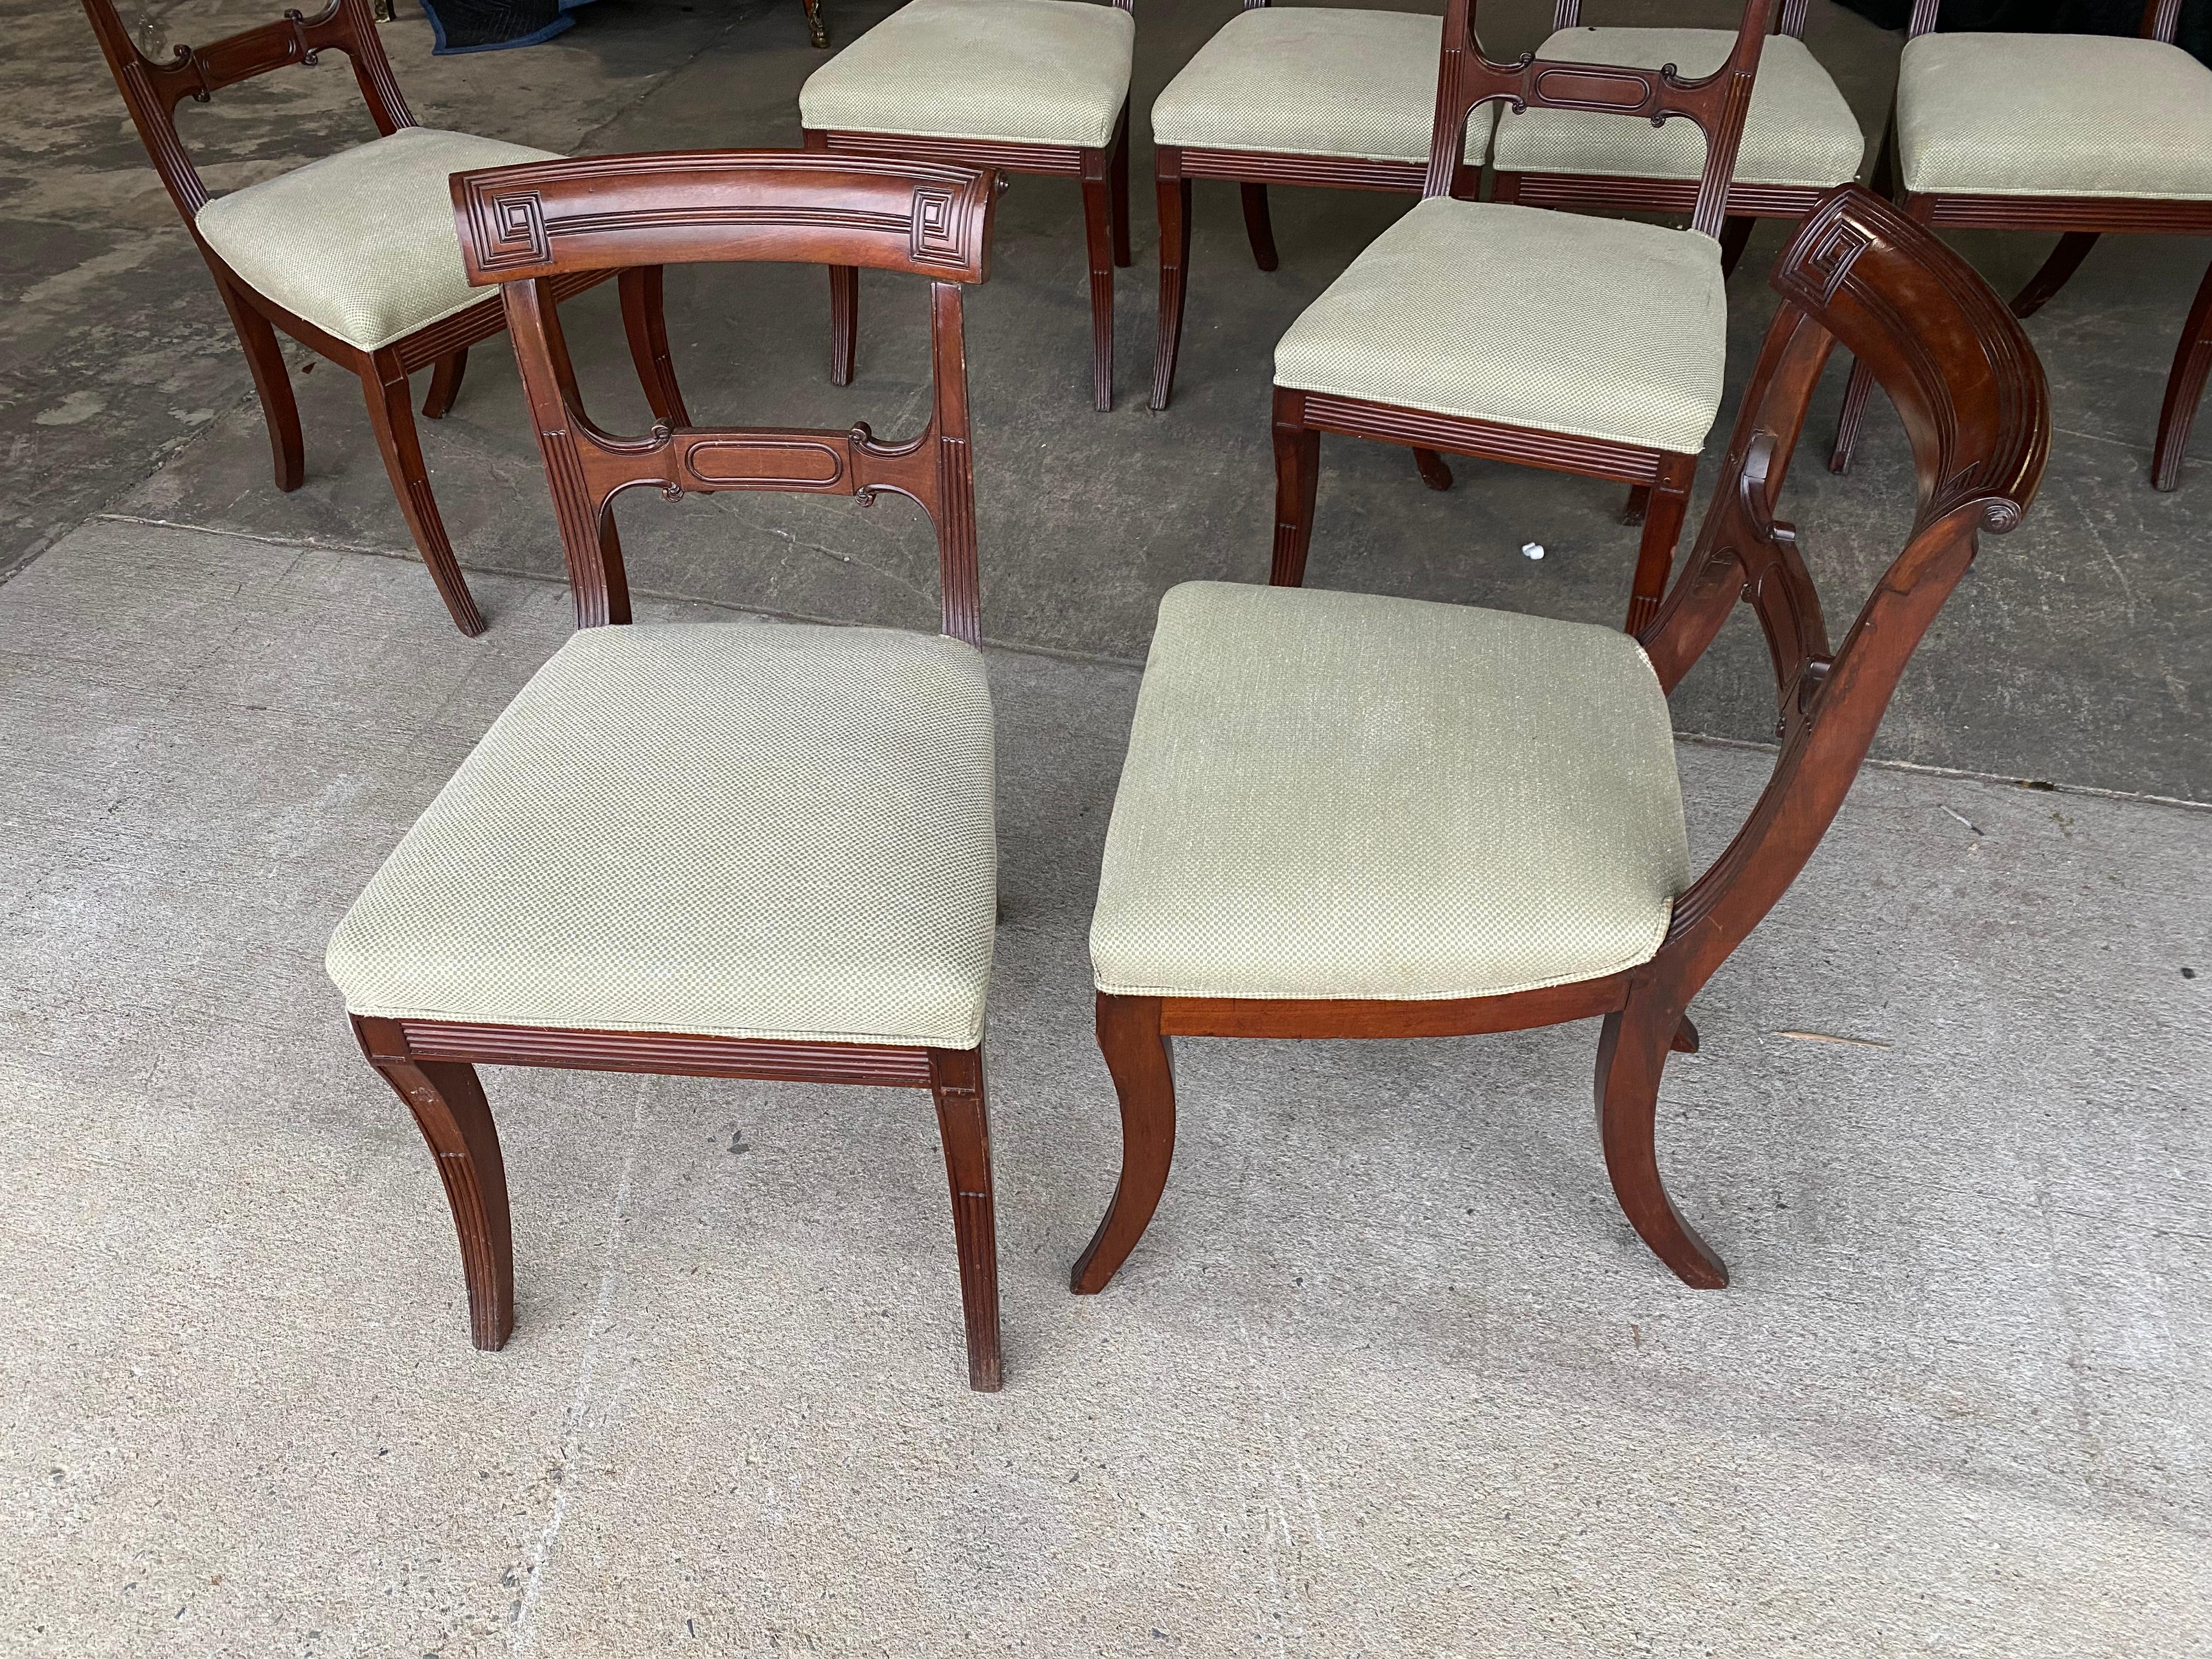 Set of 8 19th Century English Mahogany Side Chairs with Greek Key and Saber Legs For Sale 1